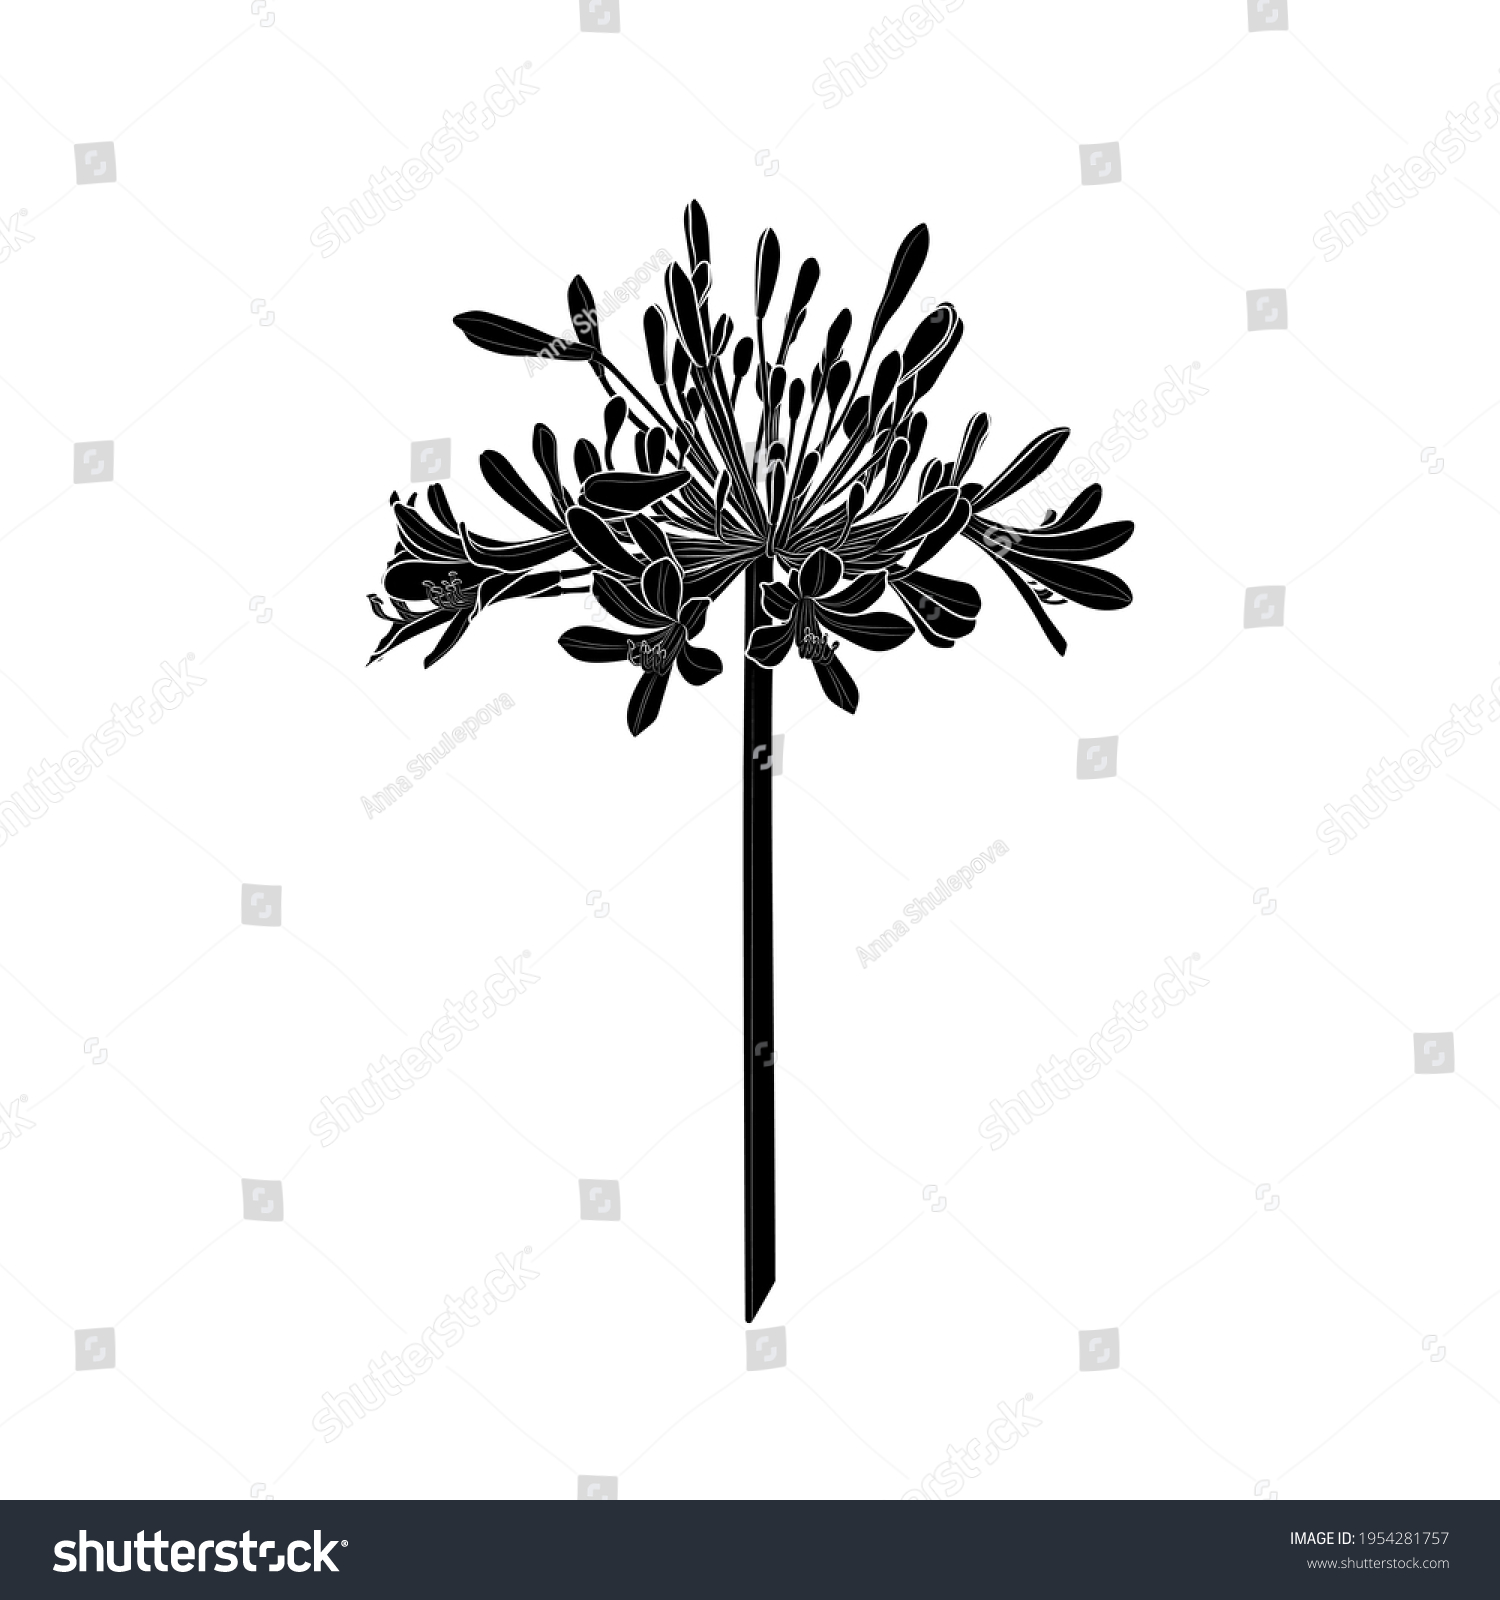 SVG of Black silhouette of Agapanthus (Lily of the Nile) on white background. Vector illustration. svg